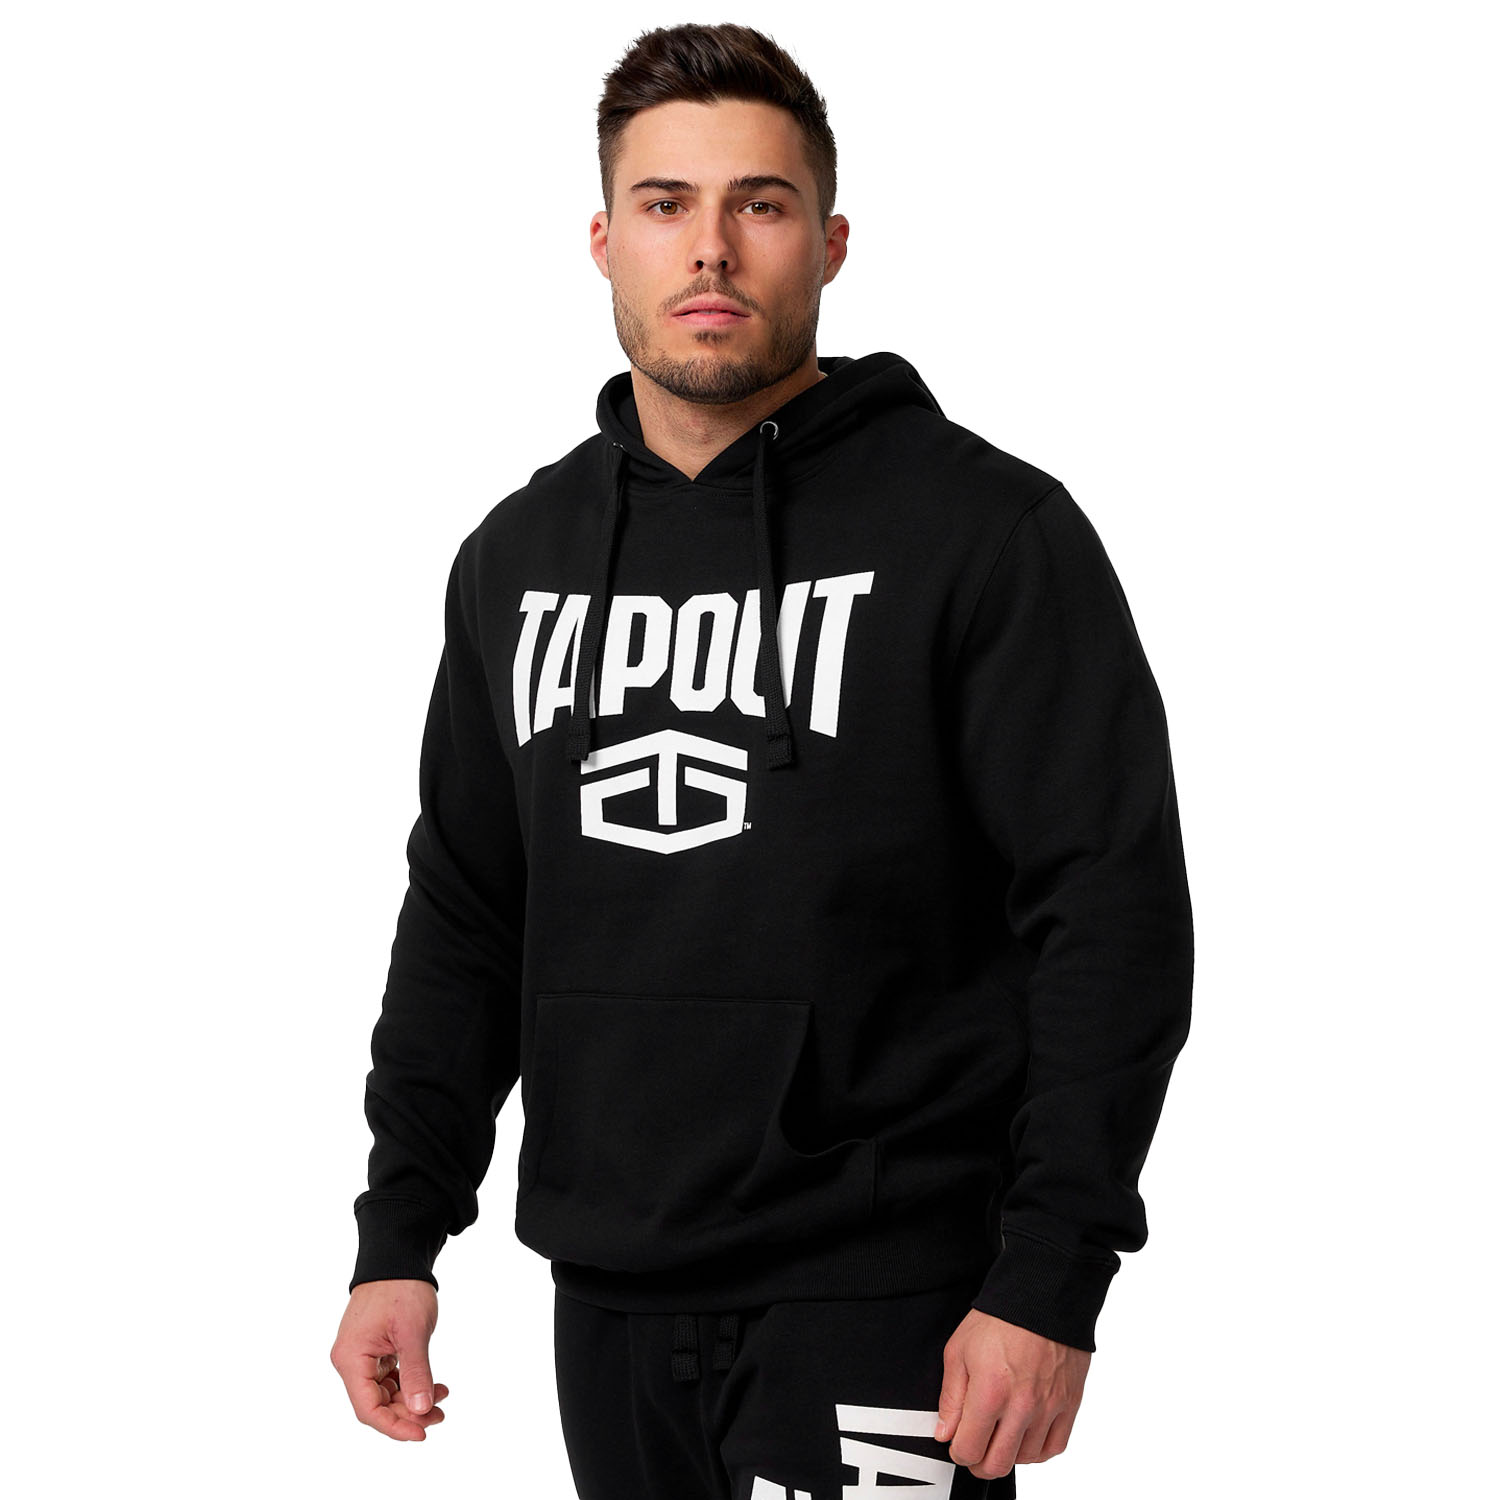 Tapout Hoody, Active Basic, black-white